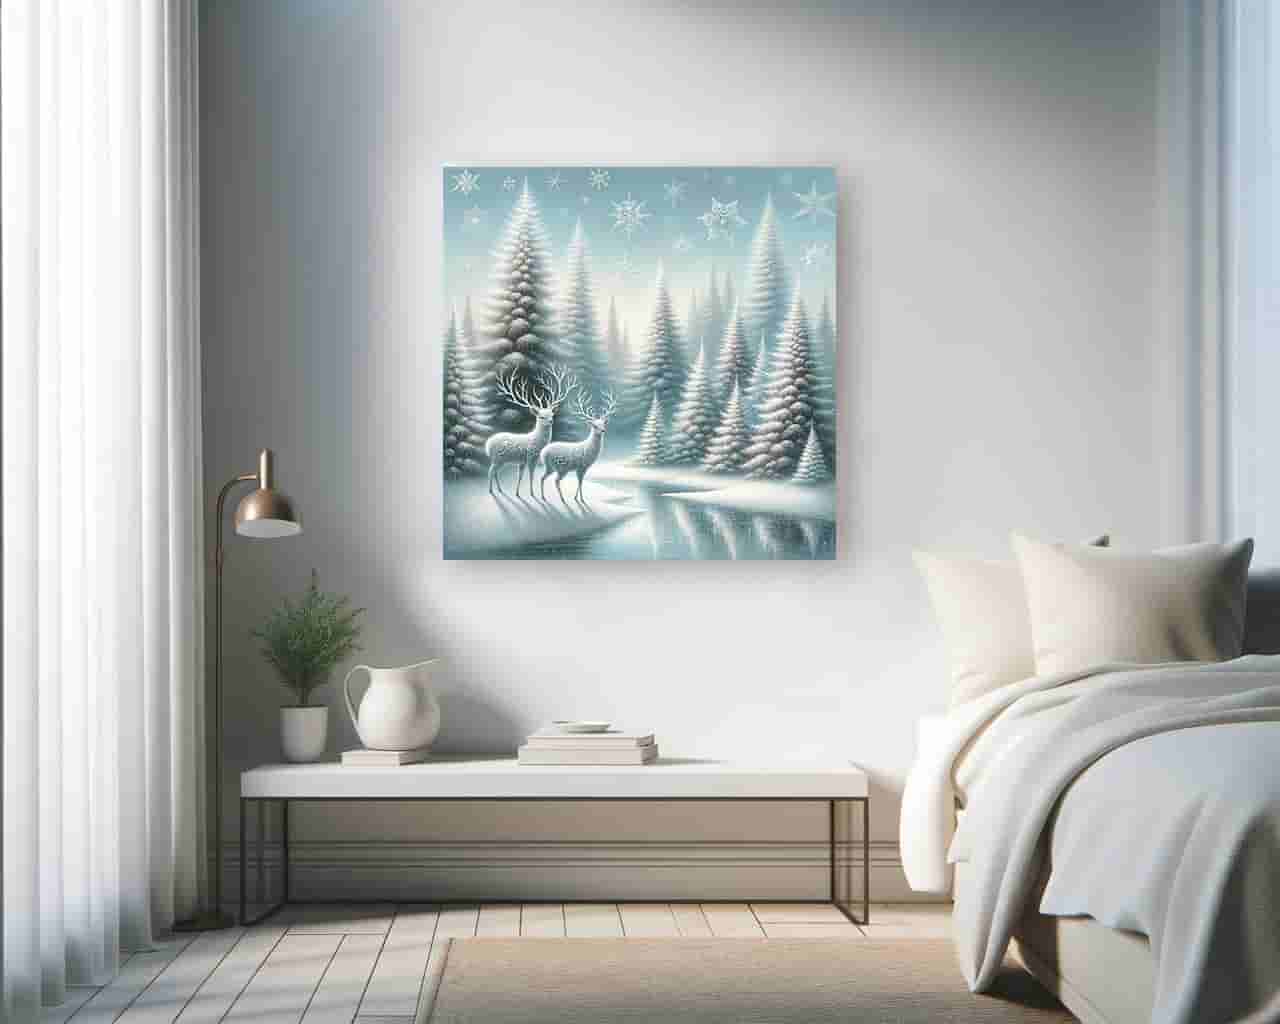 "Silent Forest Whispers - Mystical Deer in Winter Wonderland" Wrapped Canvas Wall Art Prints